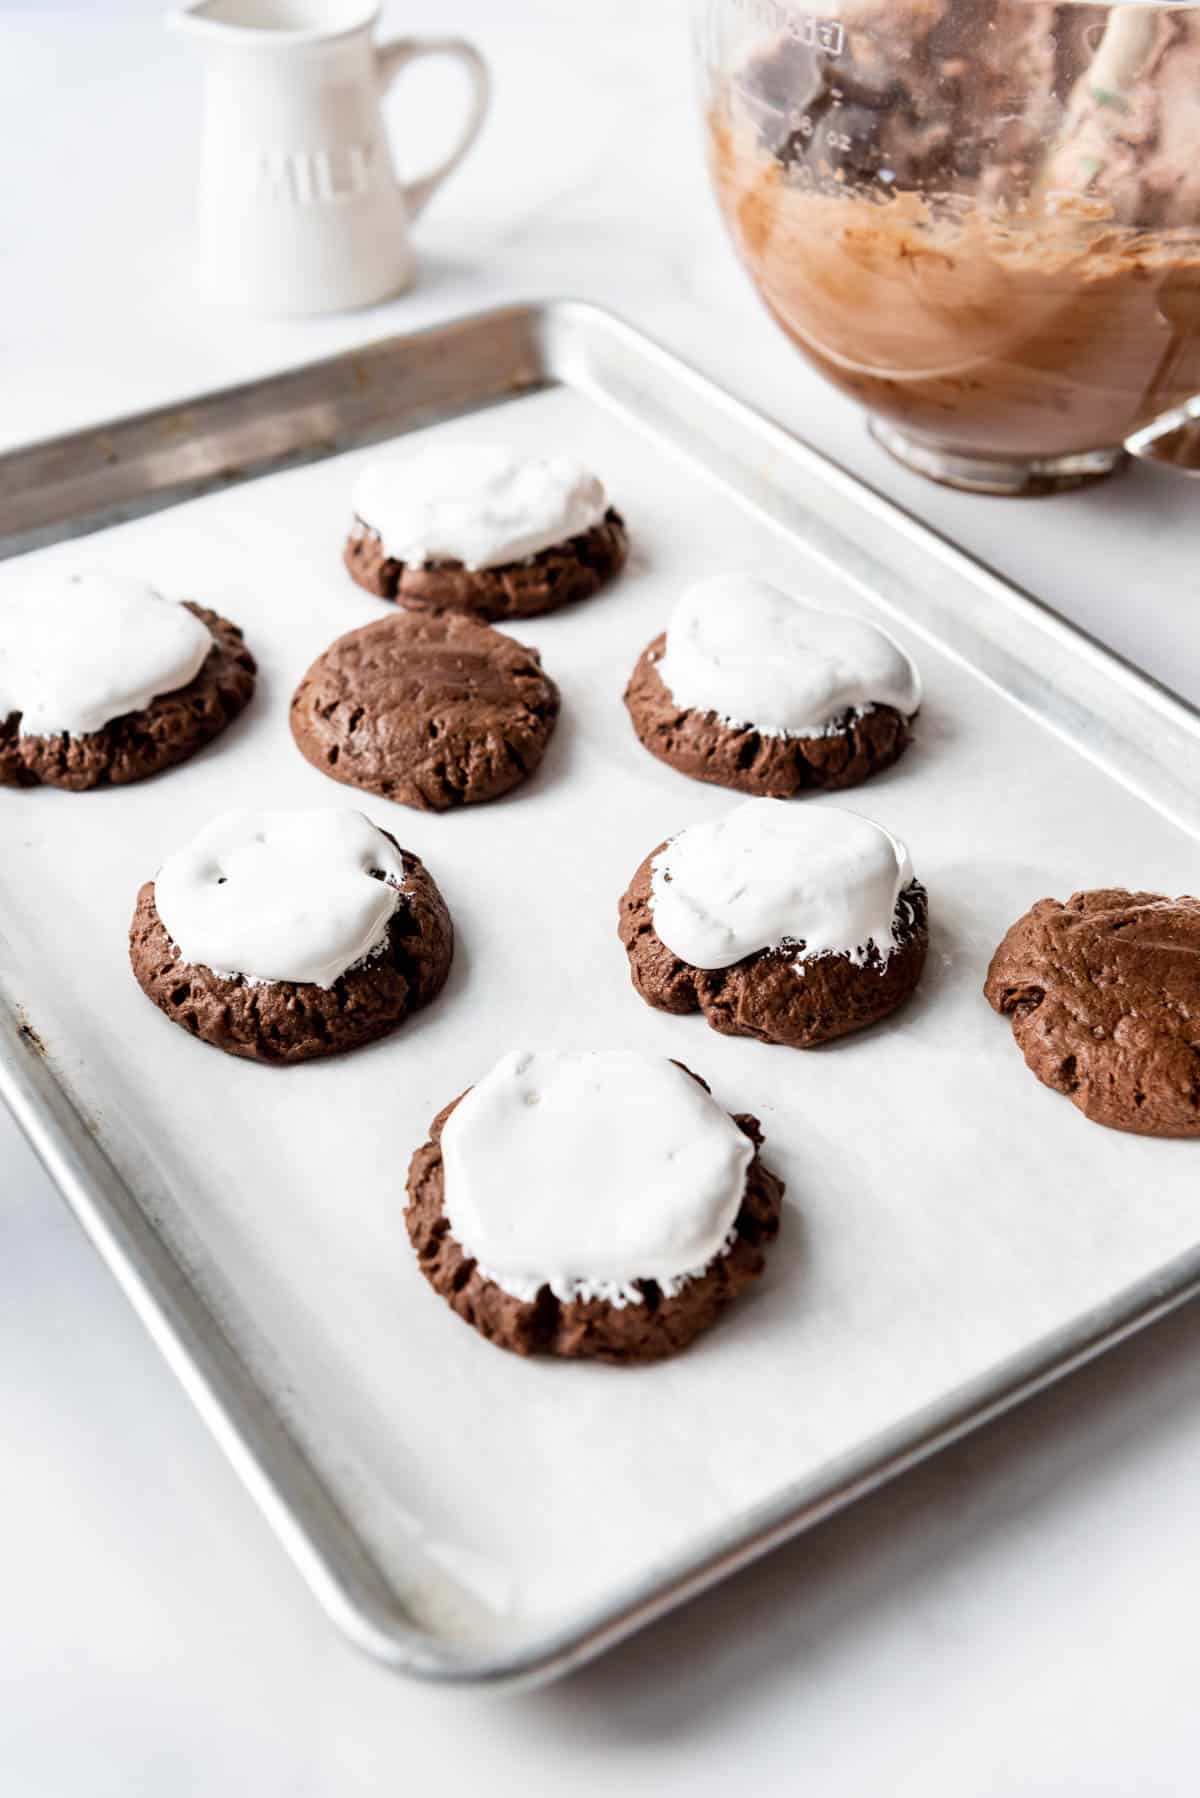 Topping chocolate cookies with marshmallow fluff.